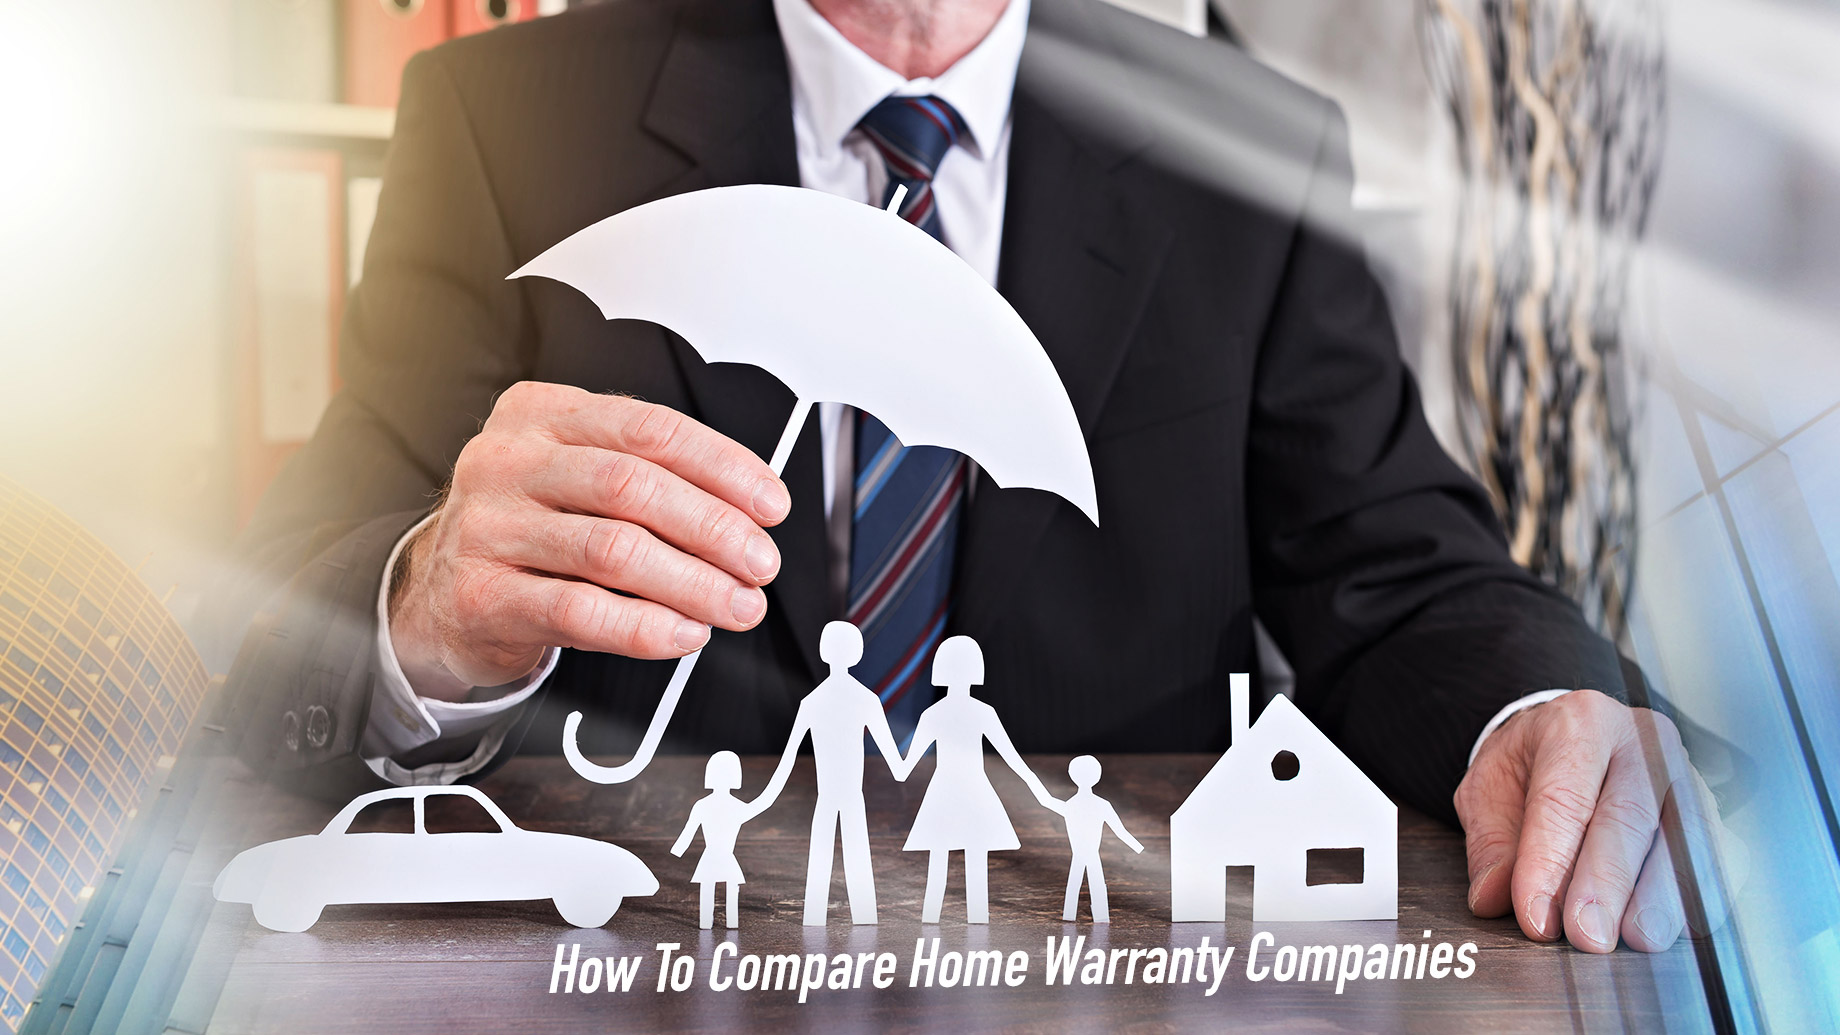 How To Compare Home Warranty Companies